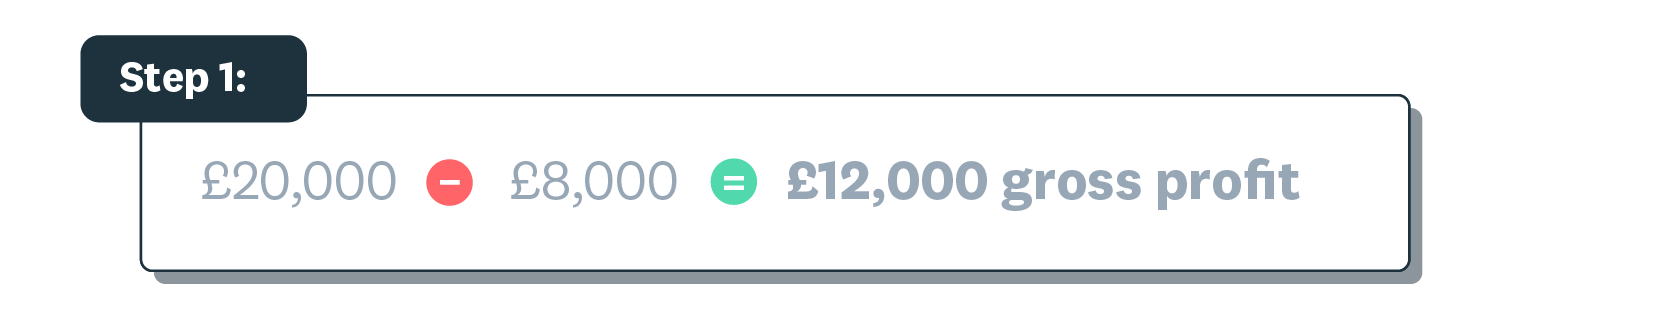 Step one example shows £20,000 minus £8,000 equals £12,000.